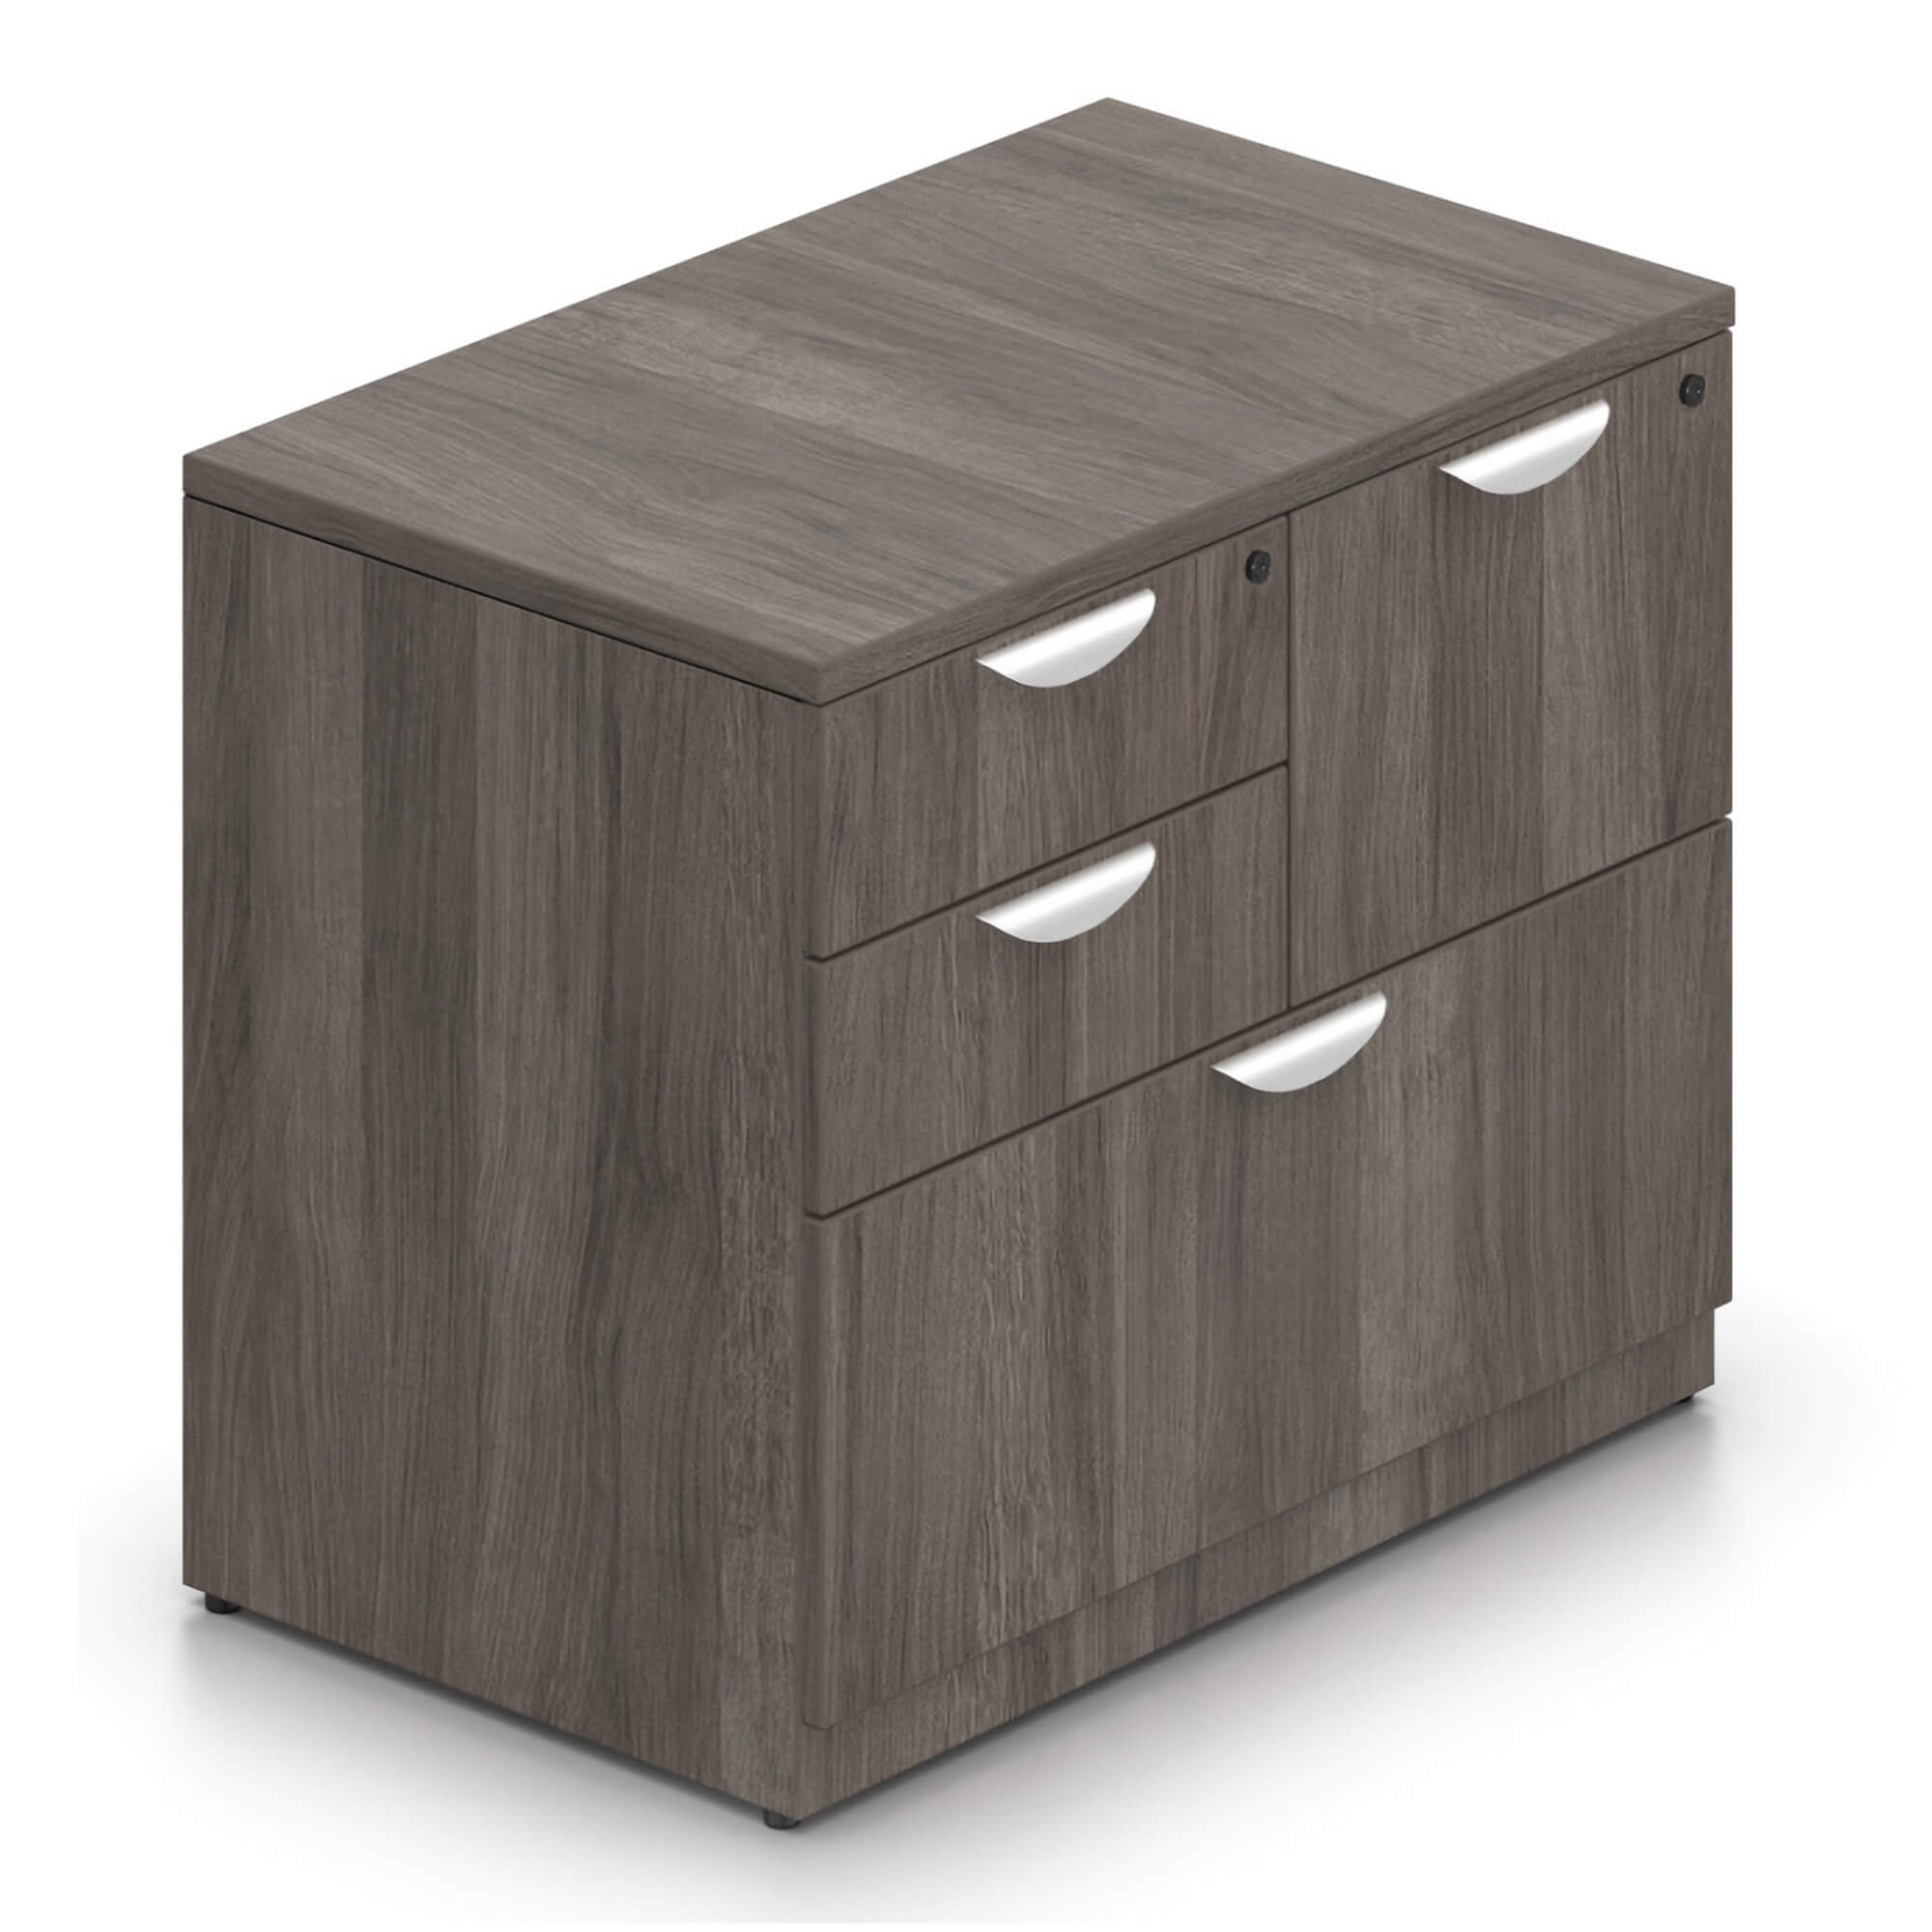 conference-room-tables-mixed-storage-cabinet-36-inch-1.jpg